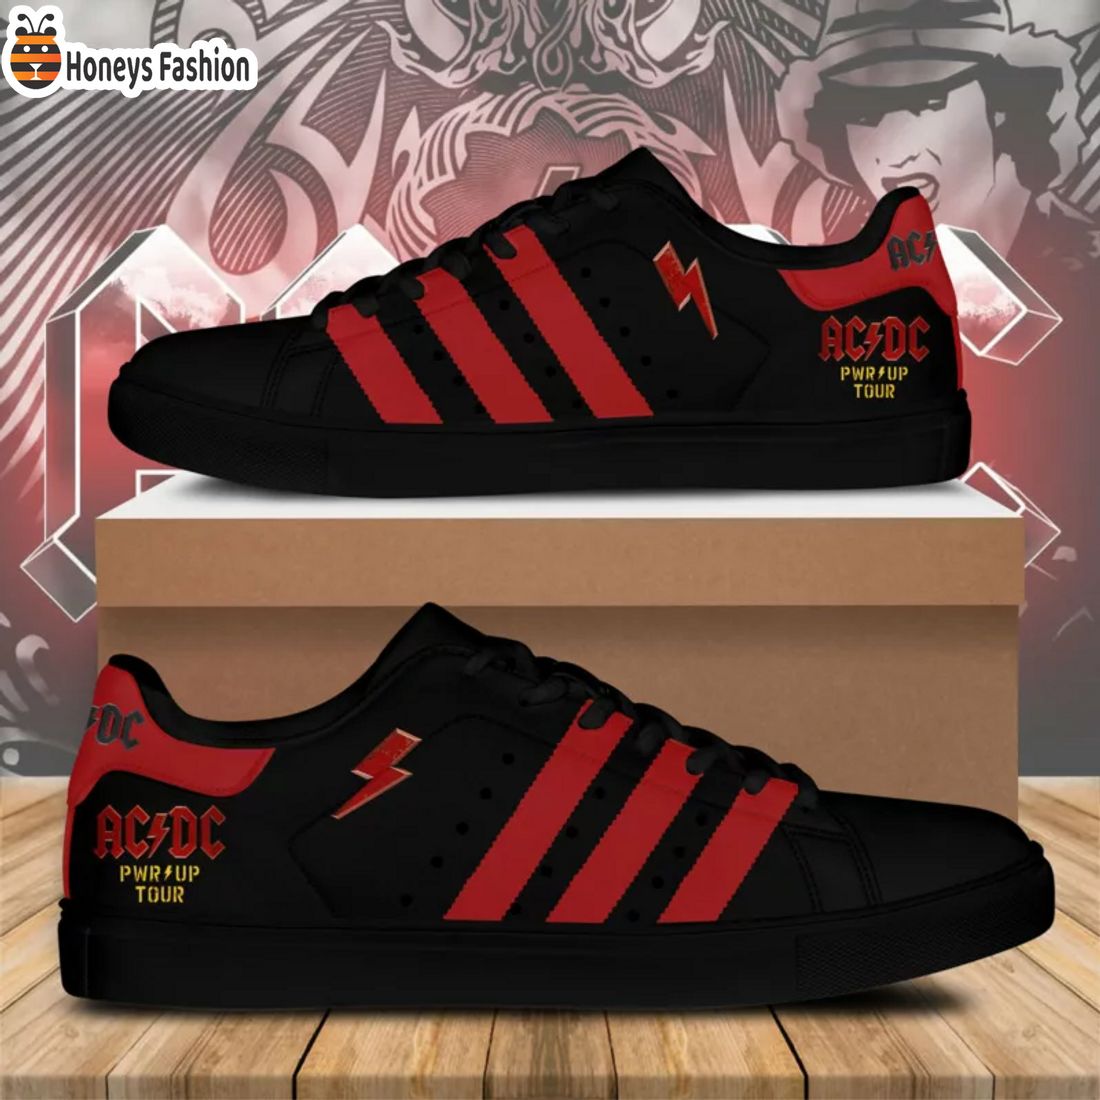 BEST SELLER ACDC Pwr Up Tour Stan Smith Shoes